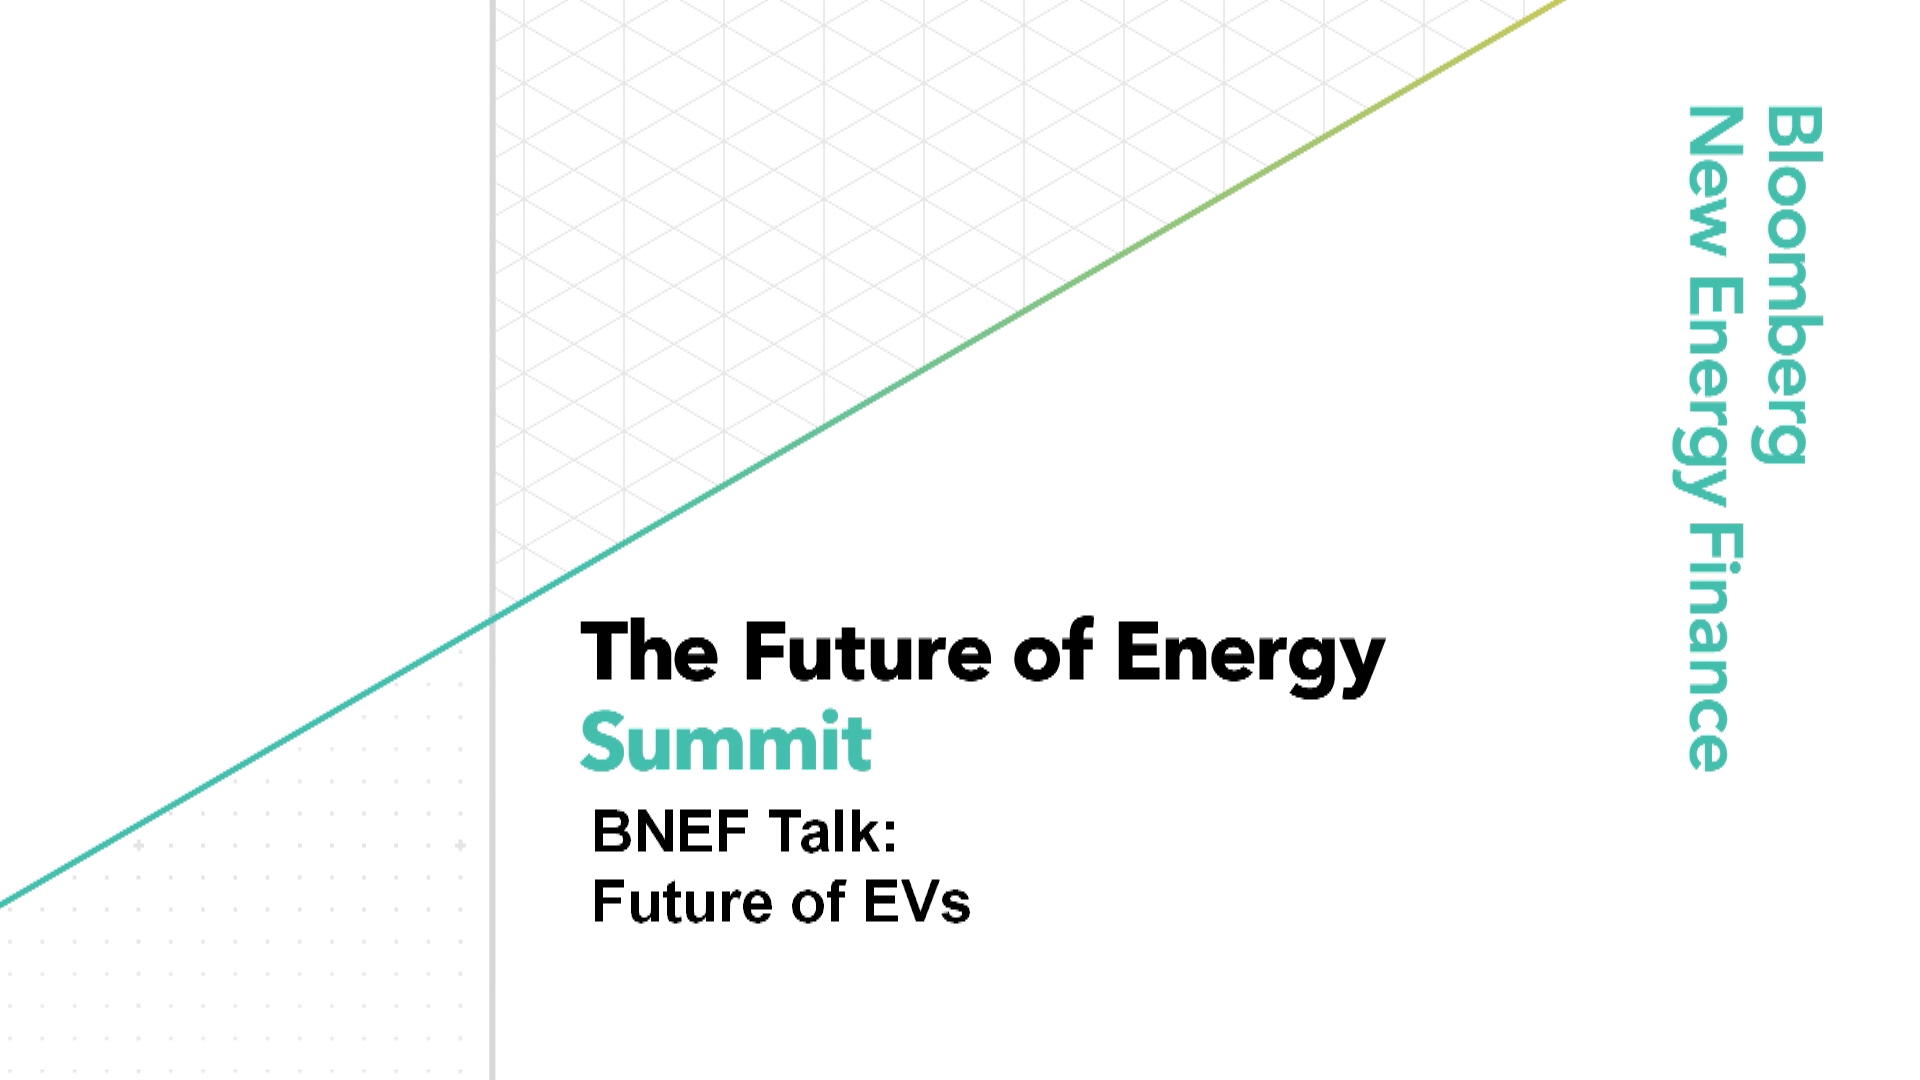 Watch BNEF Talk The Future of Electric Vehicles Bloomberg